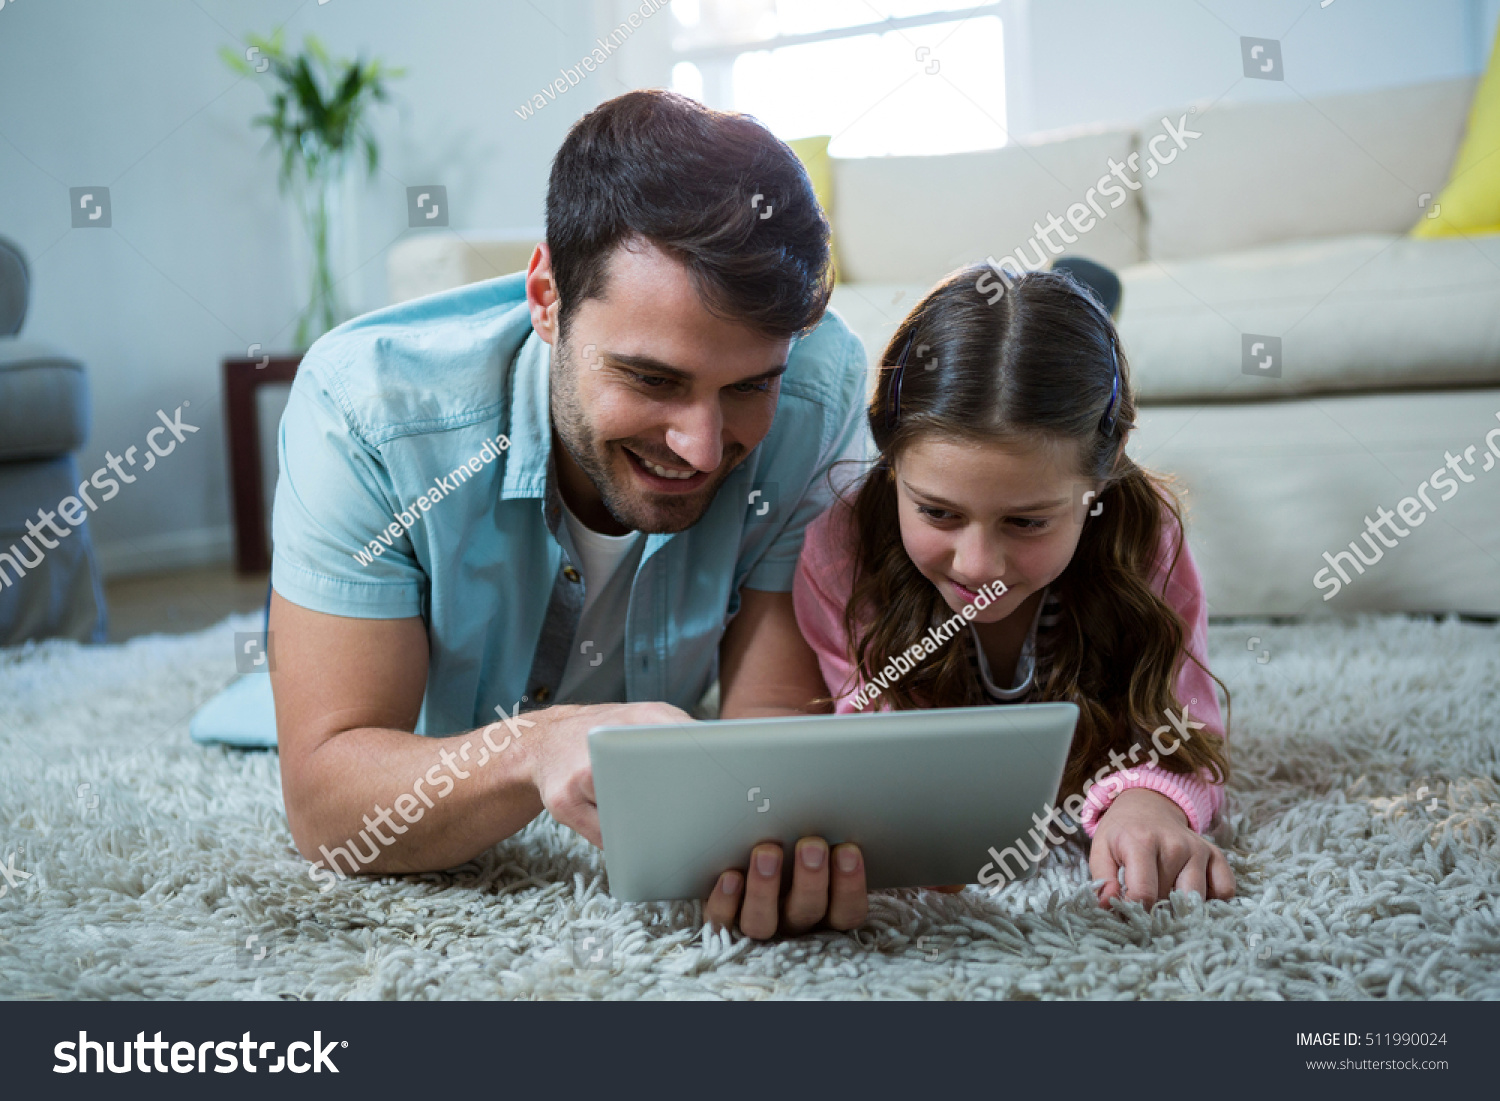 Father and daughter using digital tablet in the living room at home #511990024